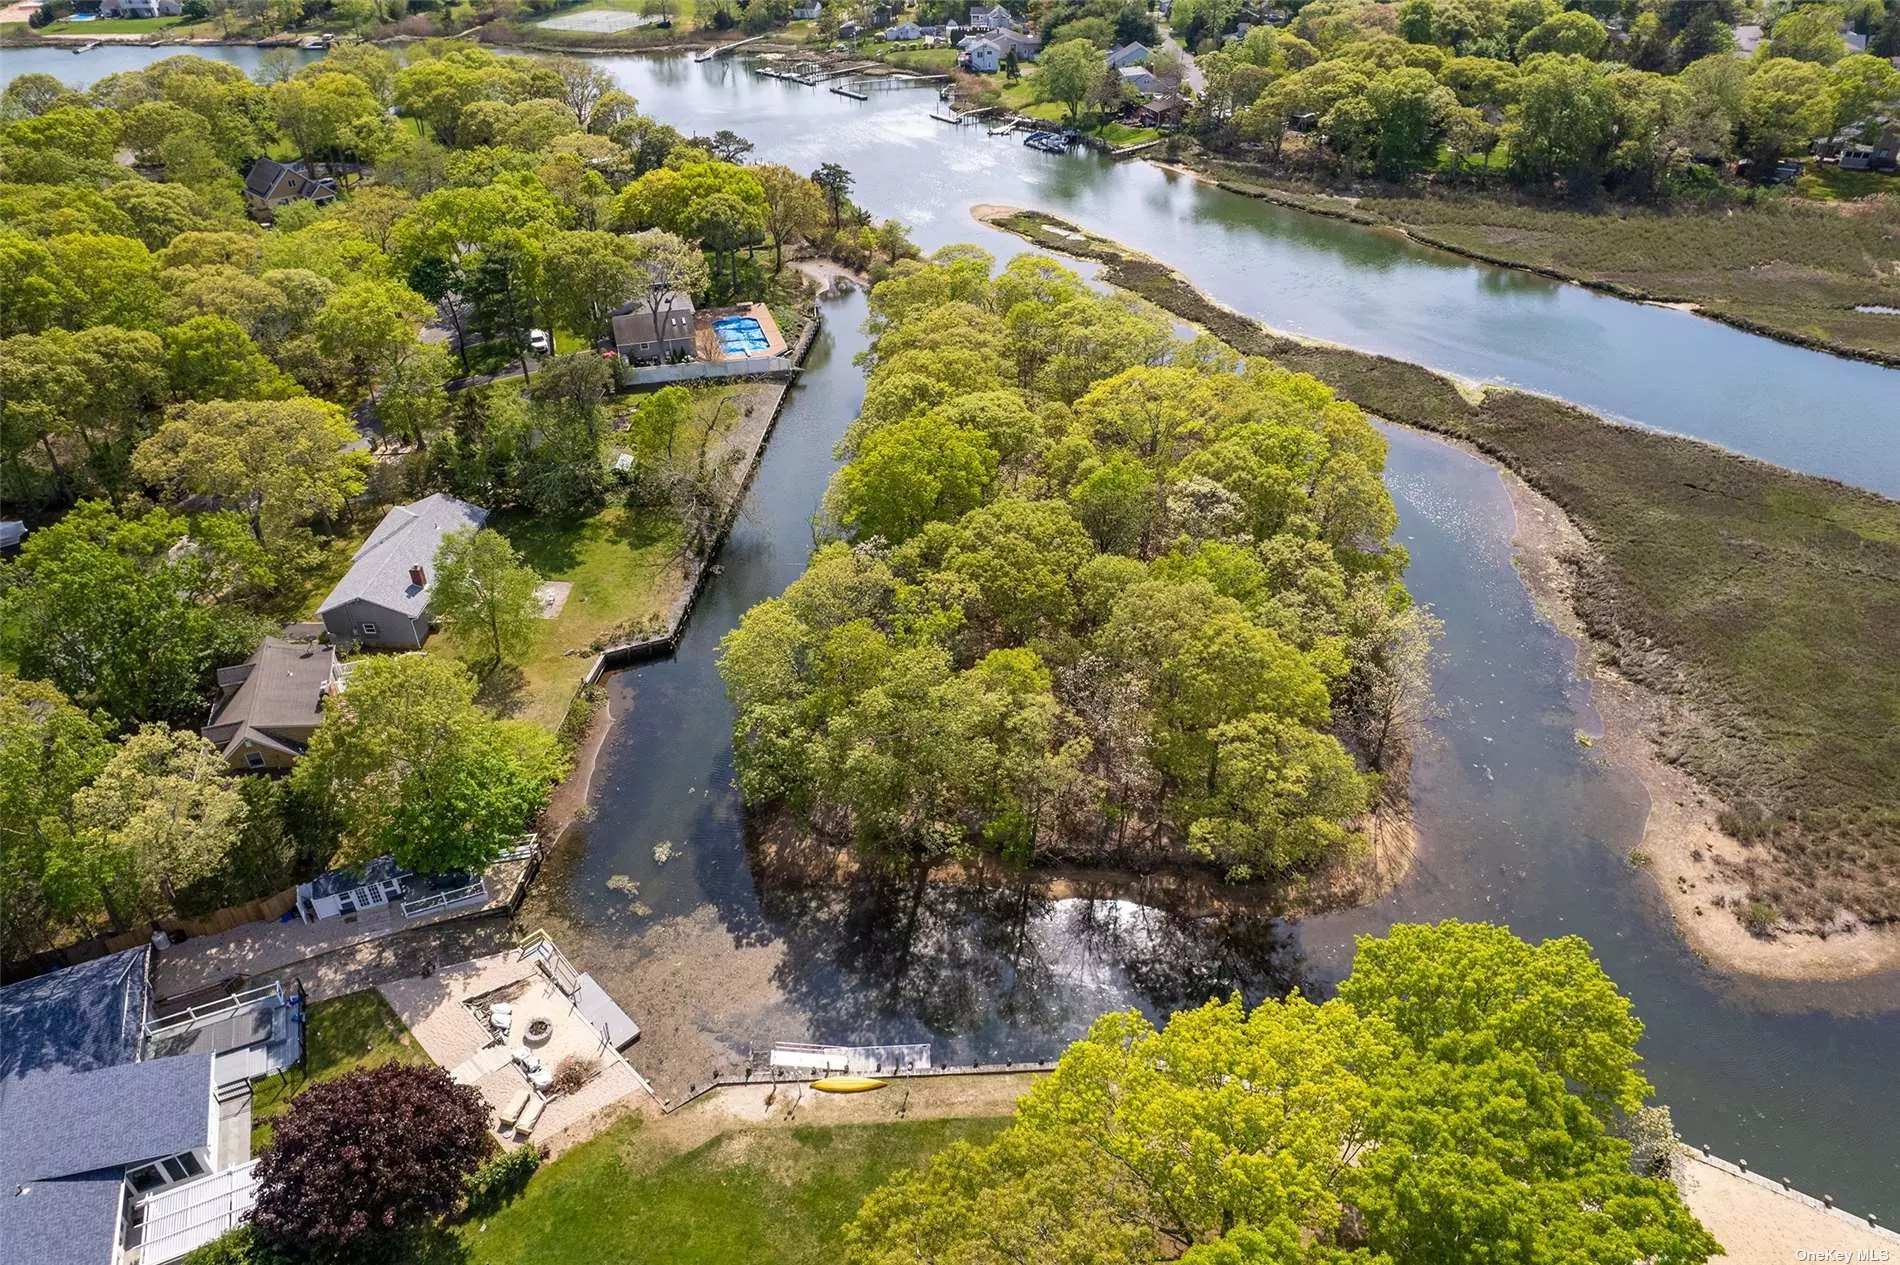 One of the most unique waterfront locations with views through an oak forest. This view is magical during a snow storm when the branches get a coating of white fluffy snow. Short moment to Strong&rsquo;s marine with boat slips around the bend. Home offers wood floors, wood burning fireplace and full basement .Take in the water views from the front door through the dining room. Not located in a flood zone so you can enjoy your waterfront vision!